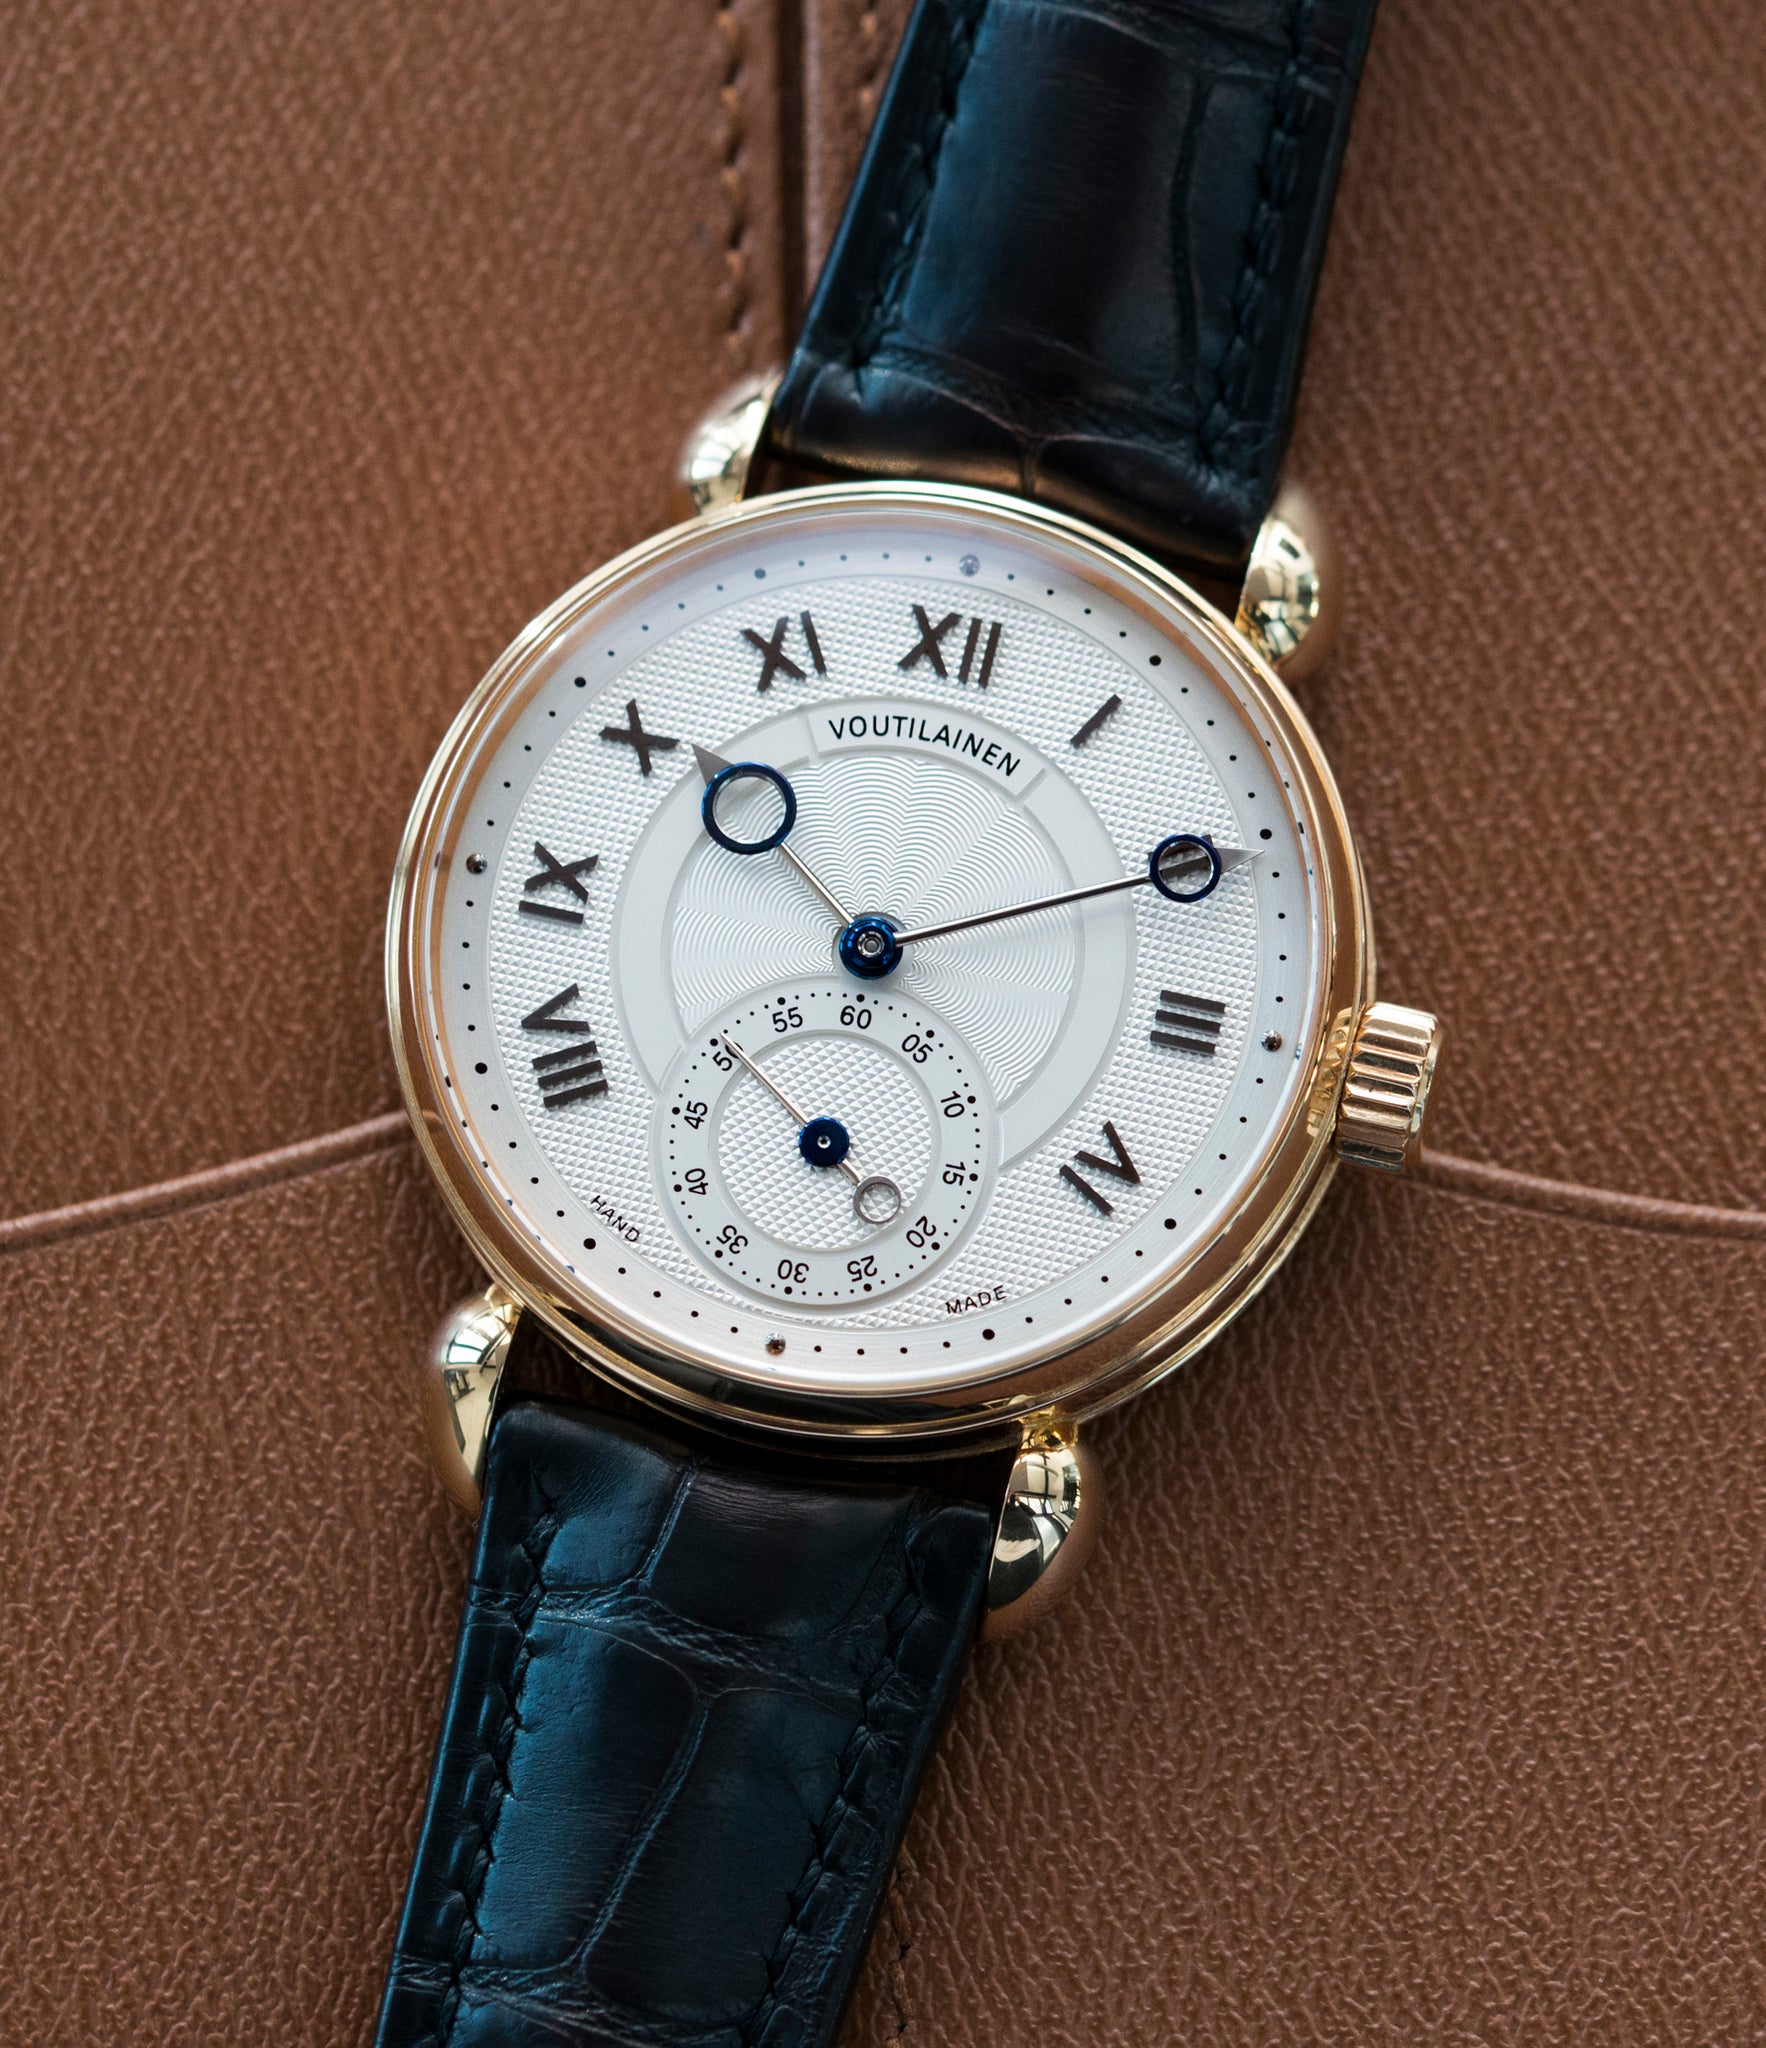 shop Kari Voutilainen Observatoire Limited Edition rose gold rare dress watch for sale online at A Collected Man London endorsed seller of independent watchmaker